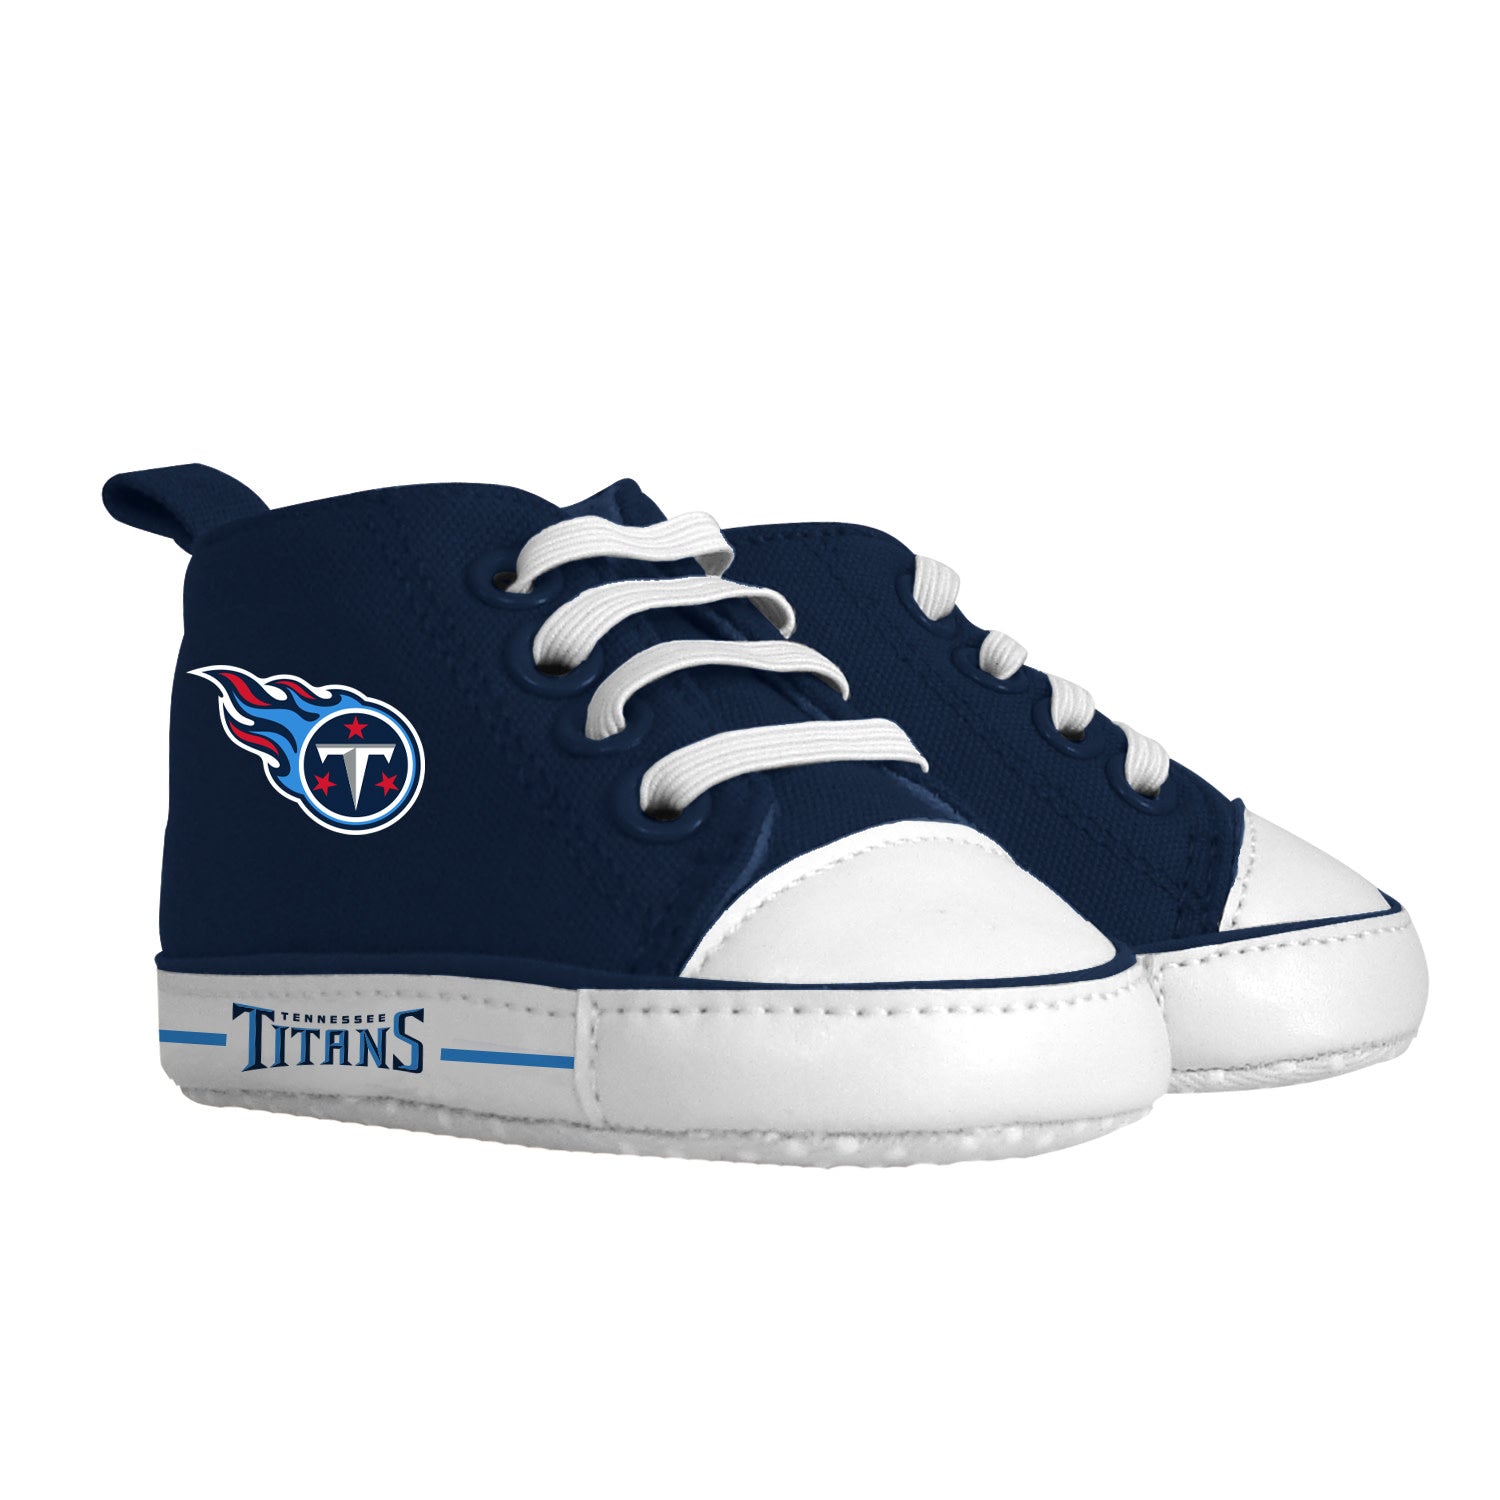 Tennessee Titans Baby Shoes